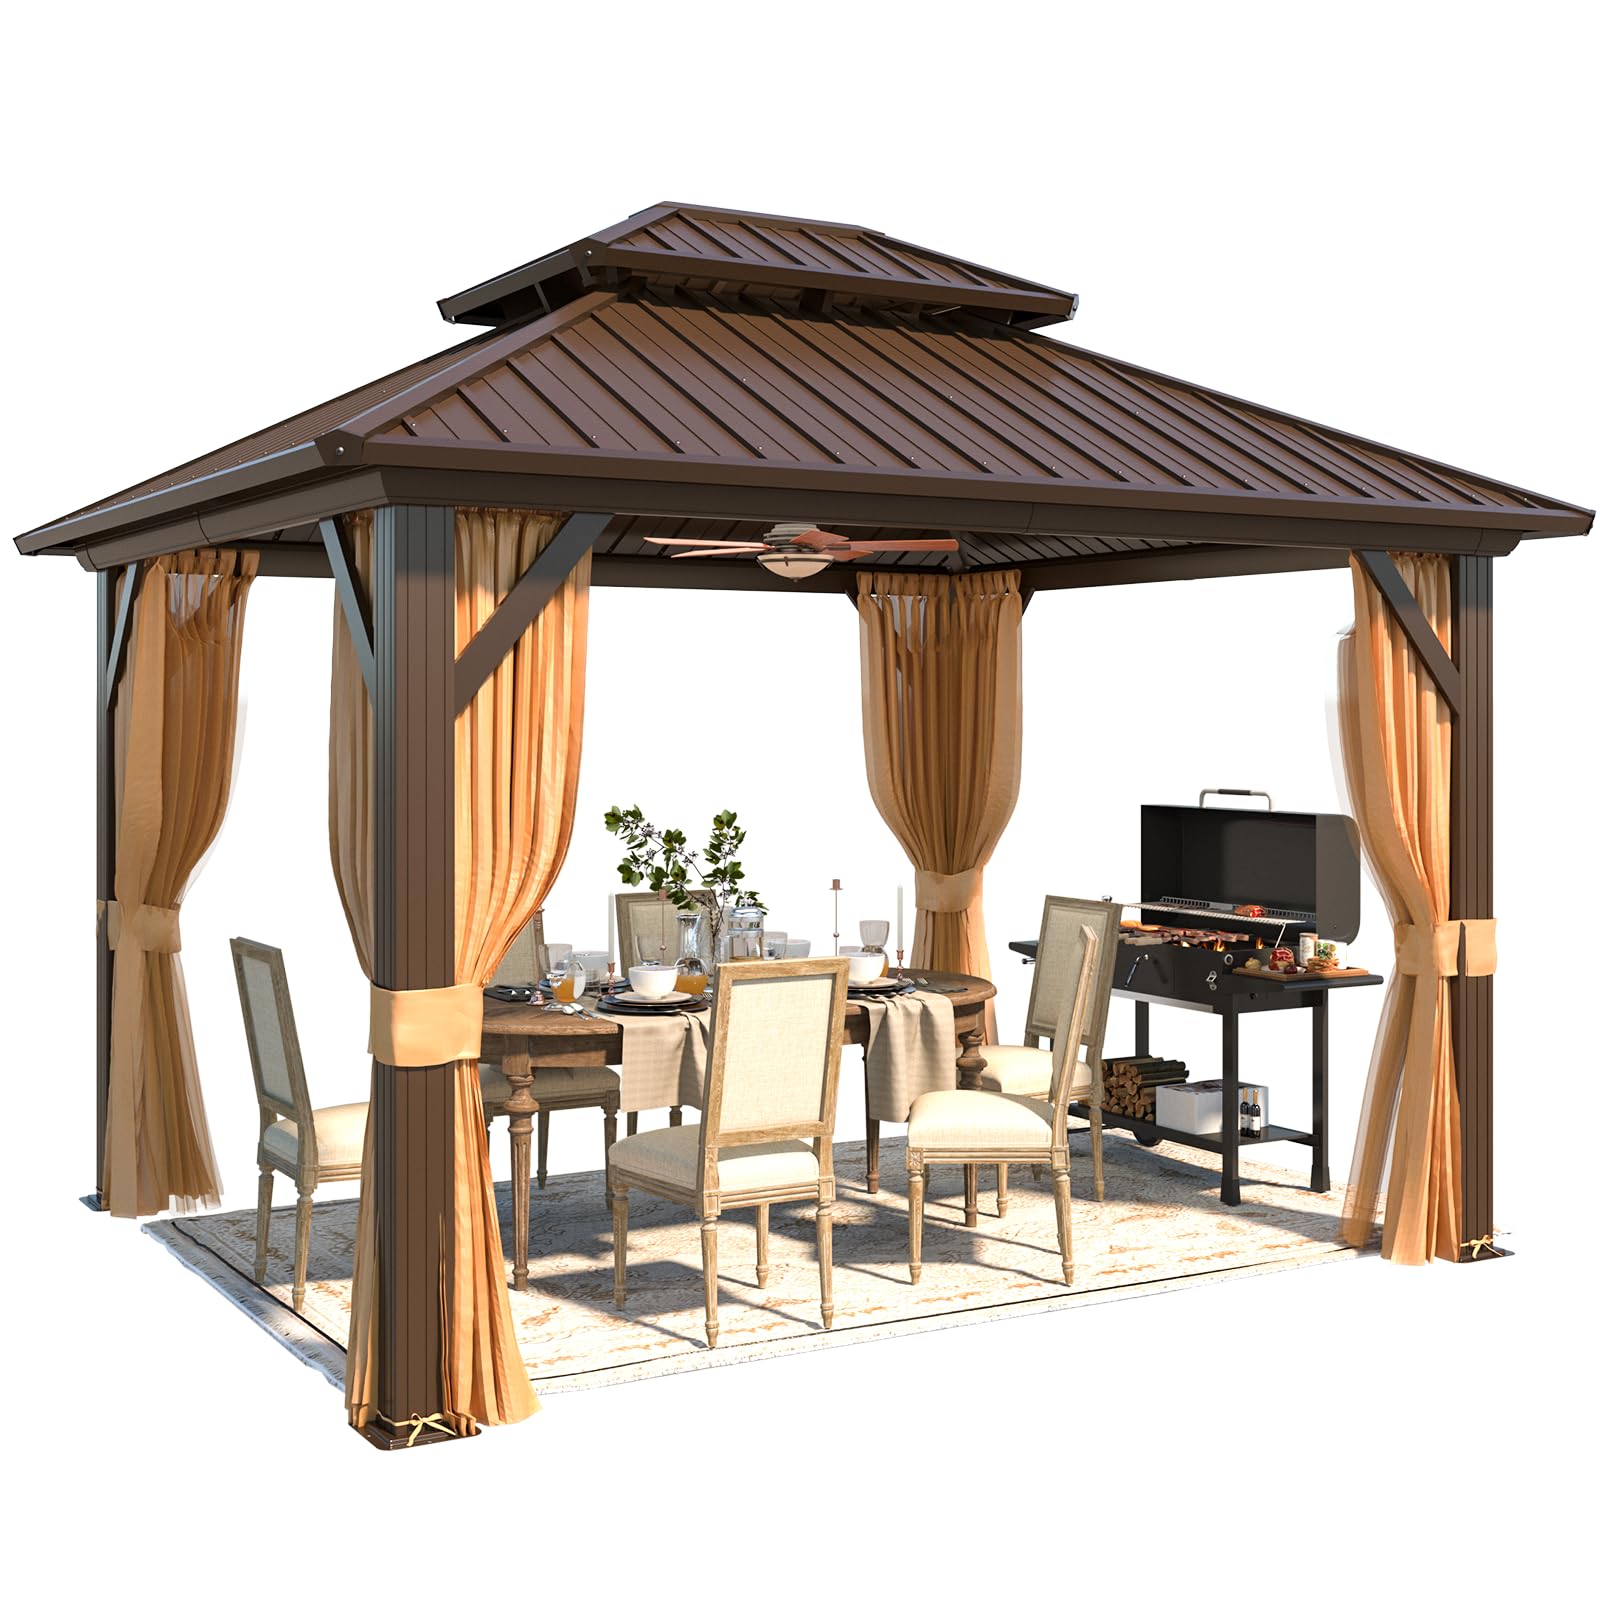 YOLENY 10' x 12' Hardtop Gazebo, Metal Gazebo with Aluminum Frame, Double Galvanized Steel Roof, Curtains and Netting Included, Pergolas for Patios, Garden, Parties, Lawns